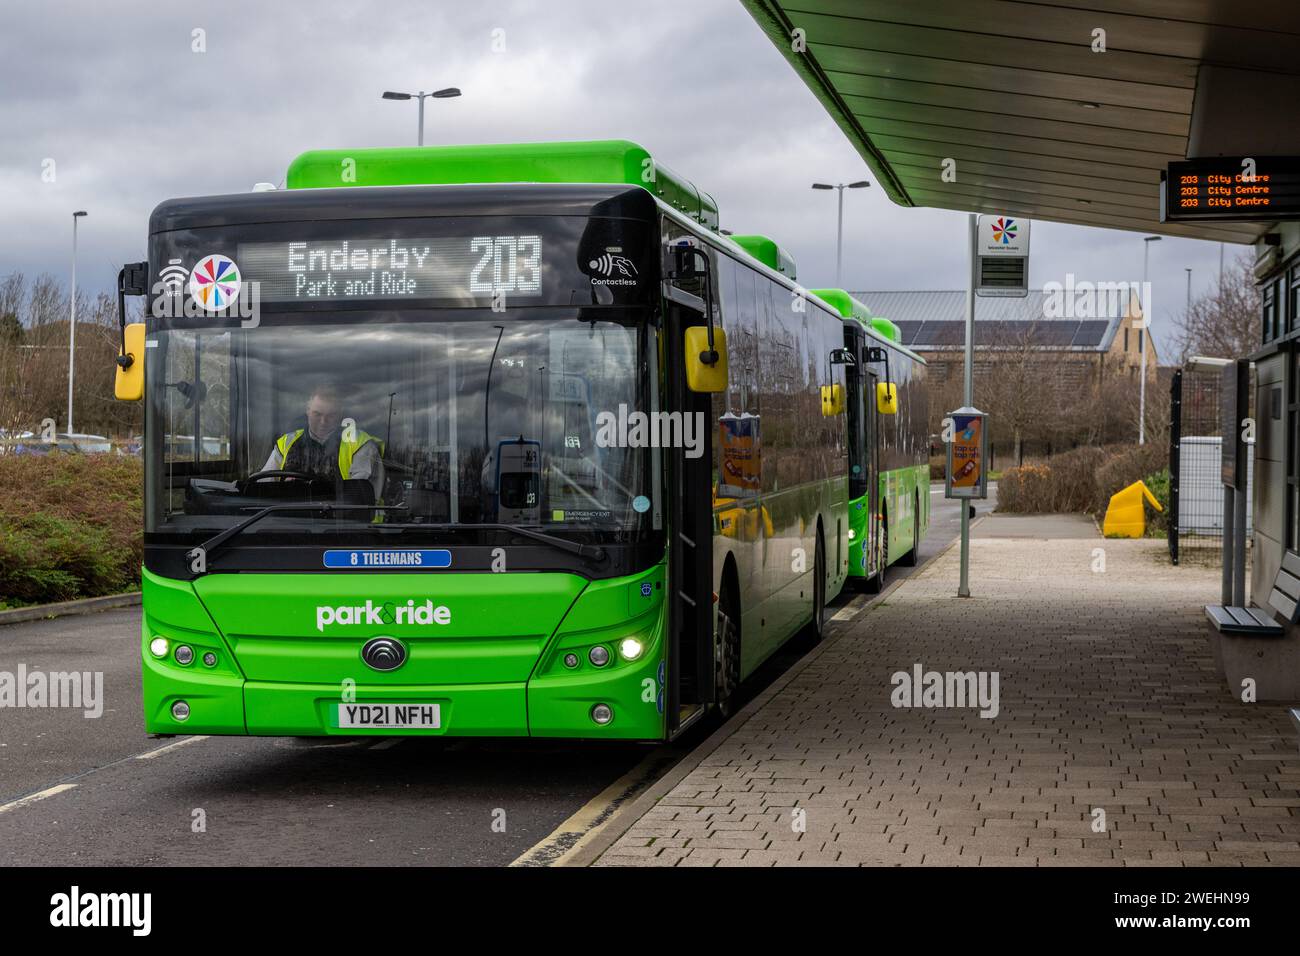 Enderby Park and Ride Buses, Leicester, Großbritannien. Stockfoto